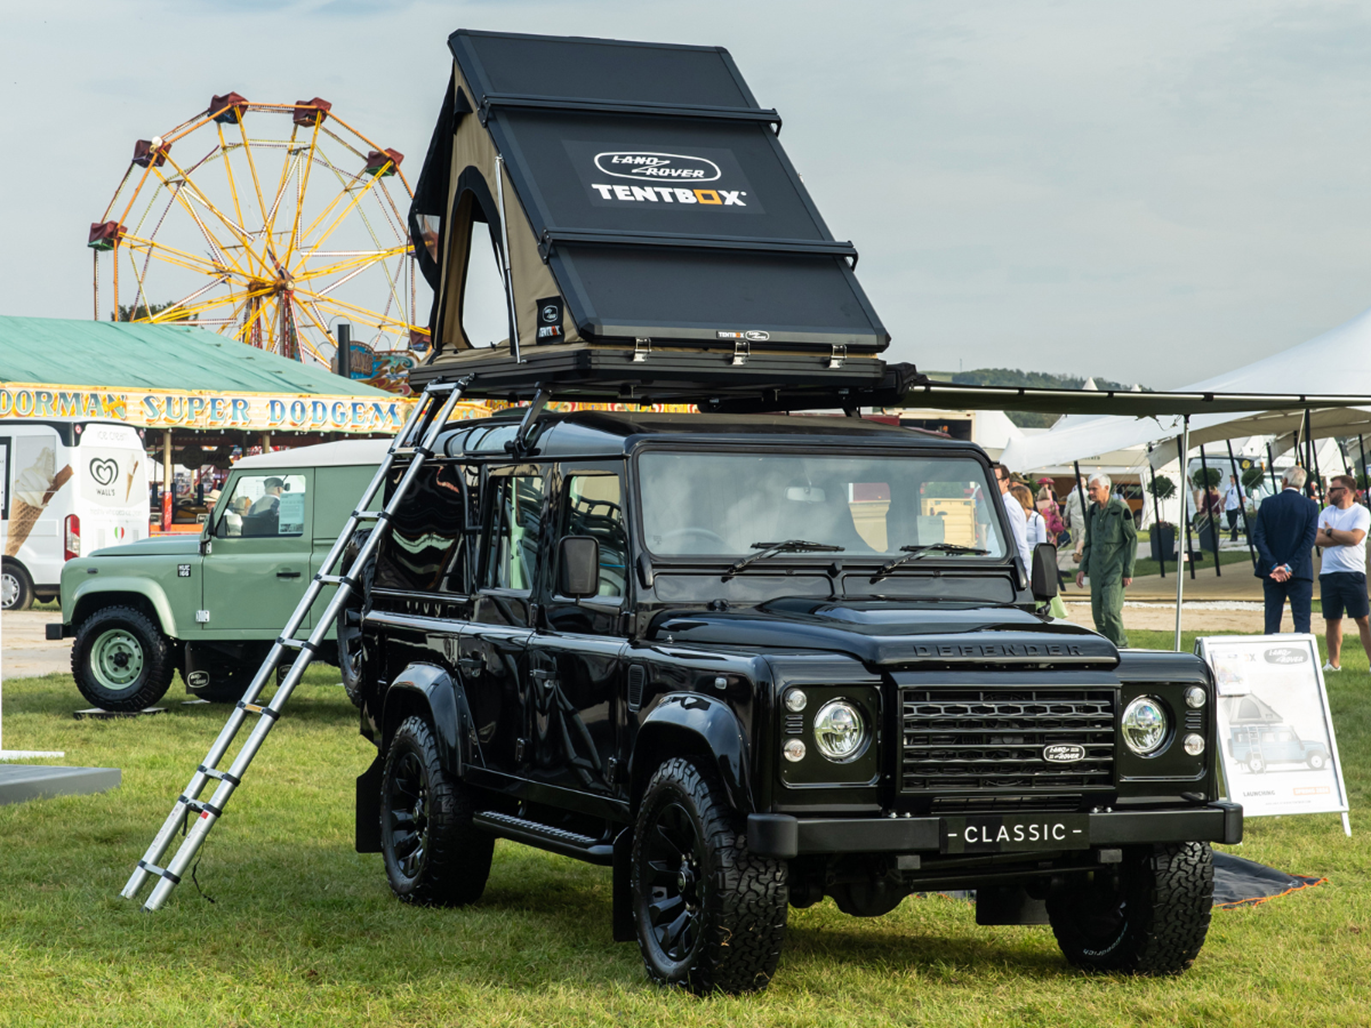 AUTHENTIC AND ORIGINAL: LAND ROVER CLASSIC INTRODUCES NEW CLASSIC DEFENDER PARTS AT GOODWOOD REVIVAL